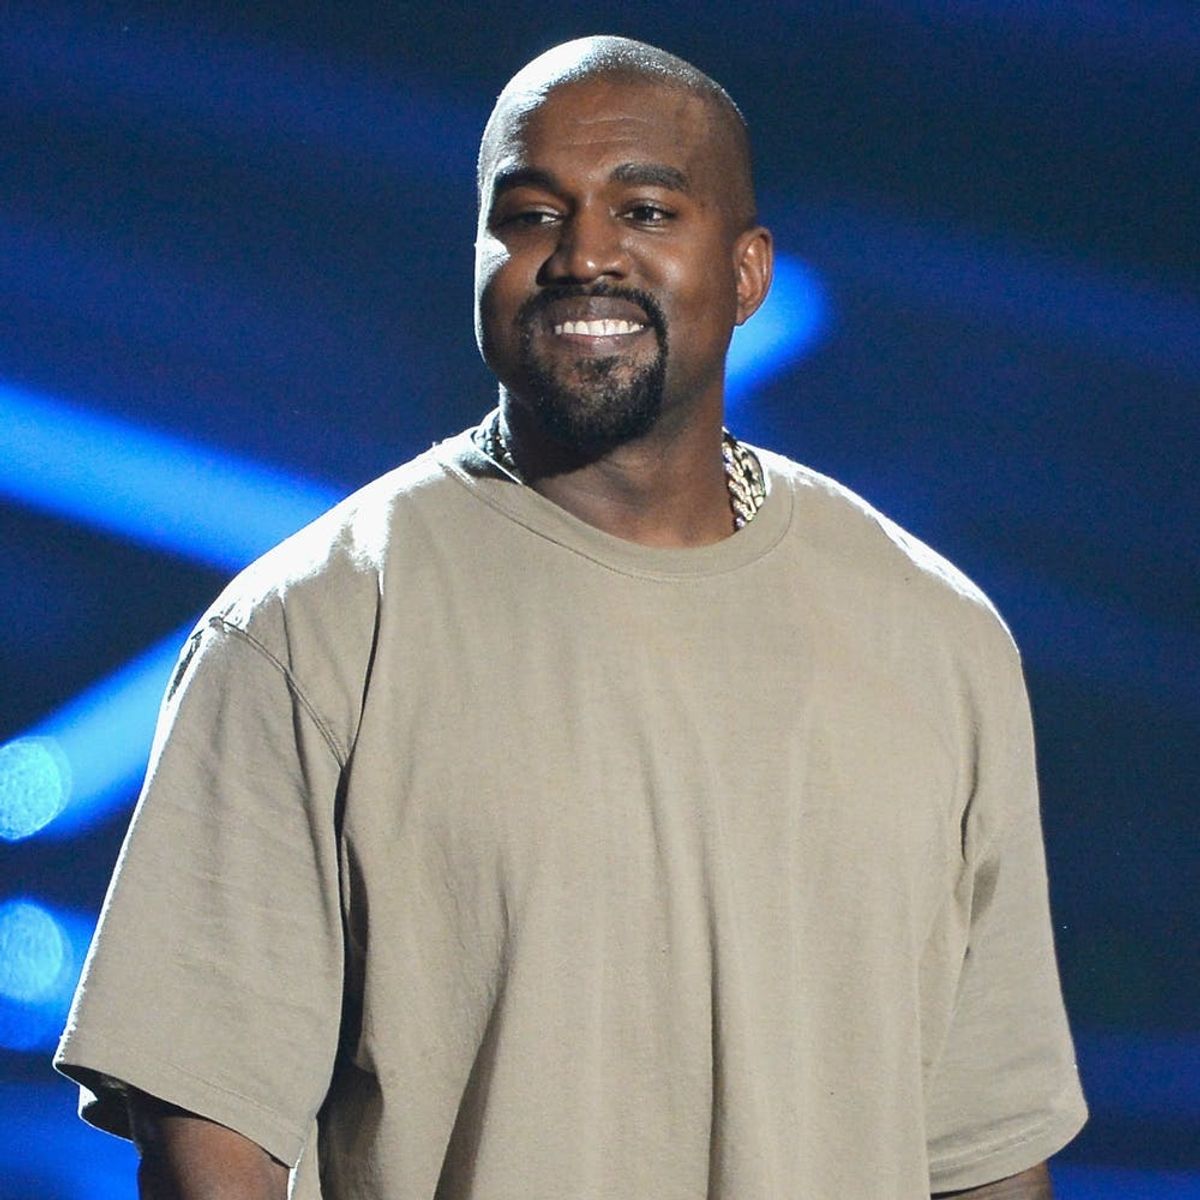 Kanye West Revealed His True Feelings on “Famous” With This Tweet